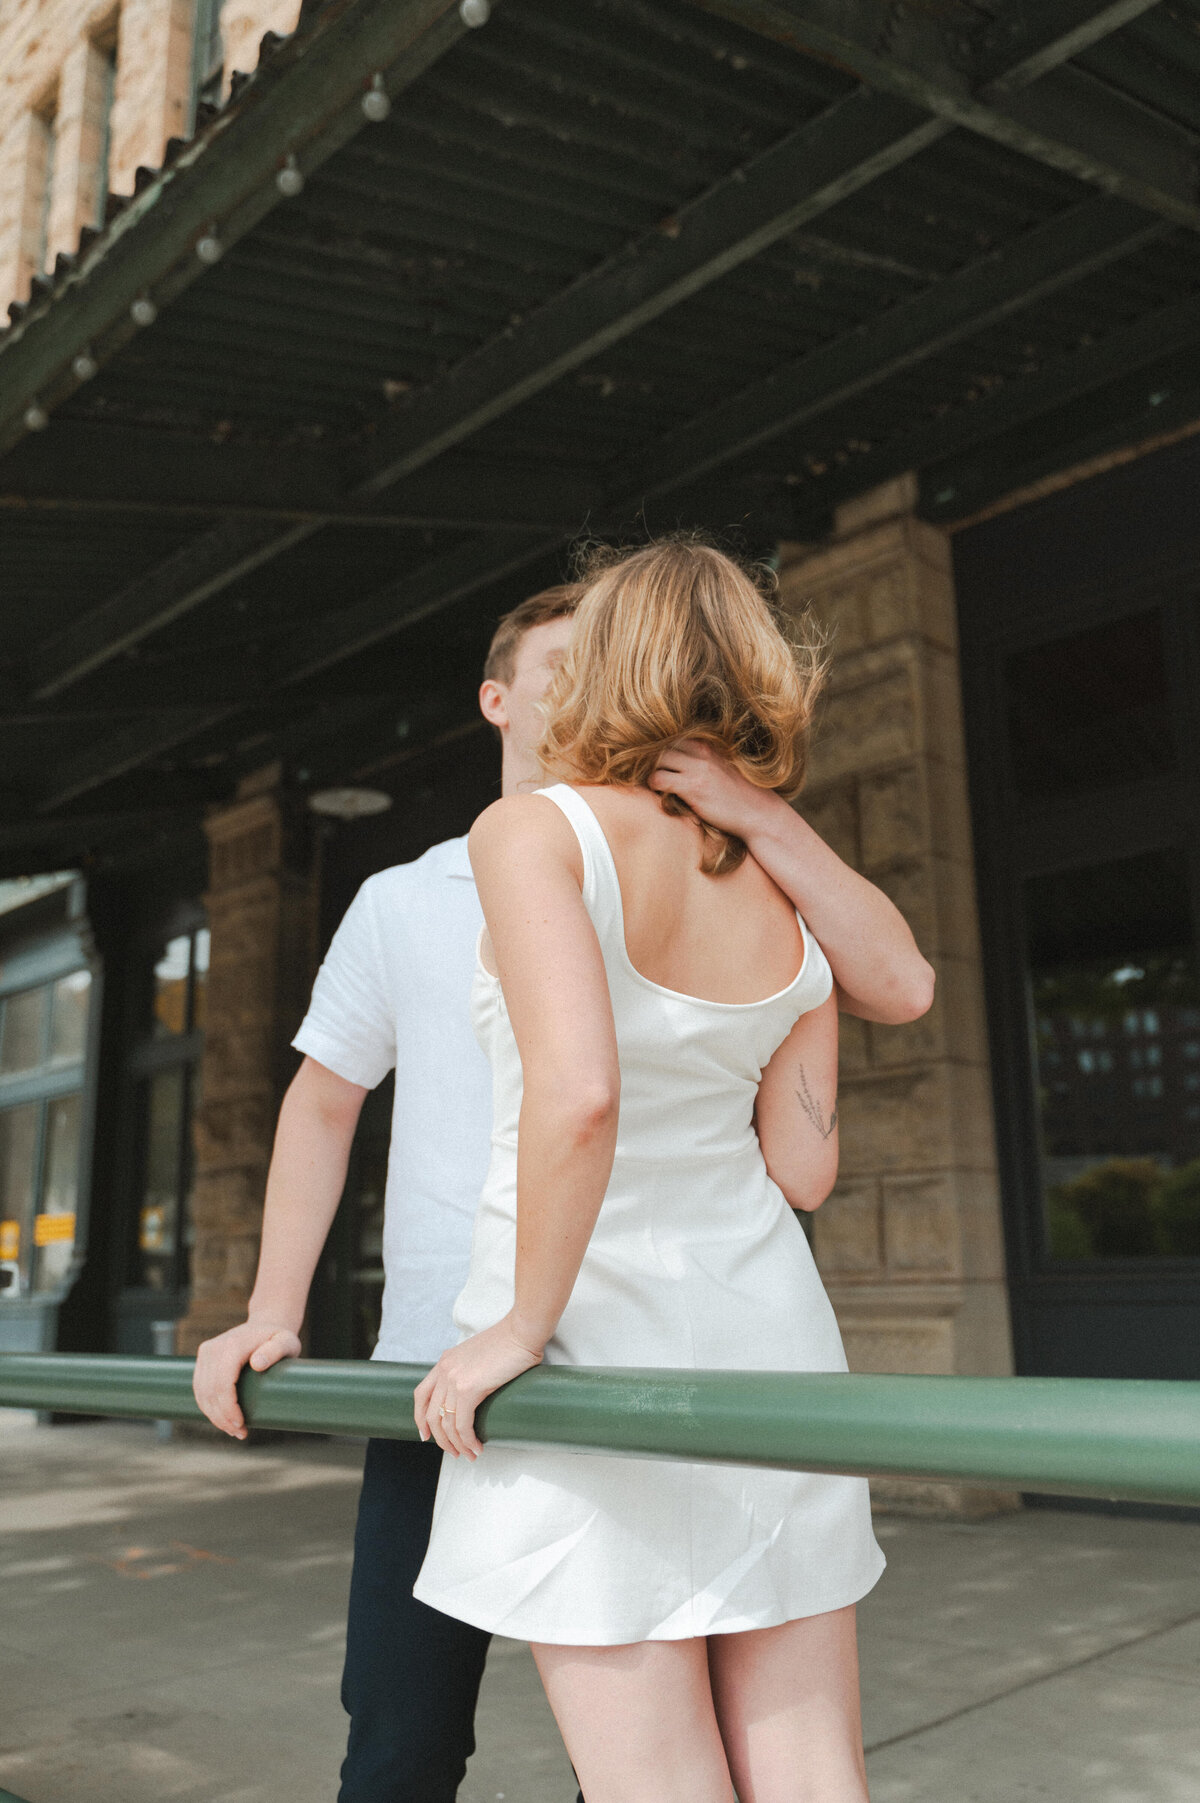 Minneapolis Engagement Session in the Hearth of the City